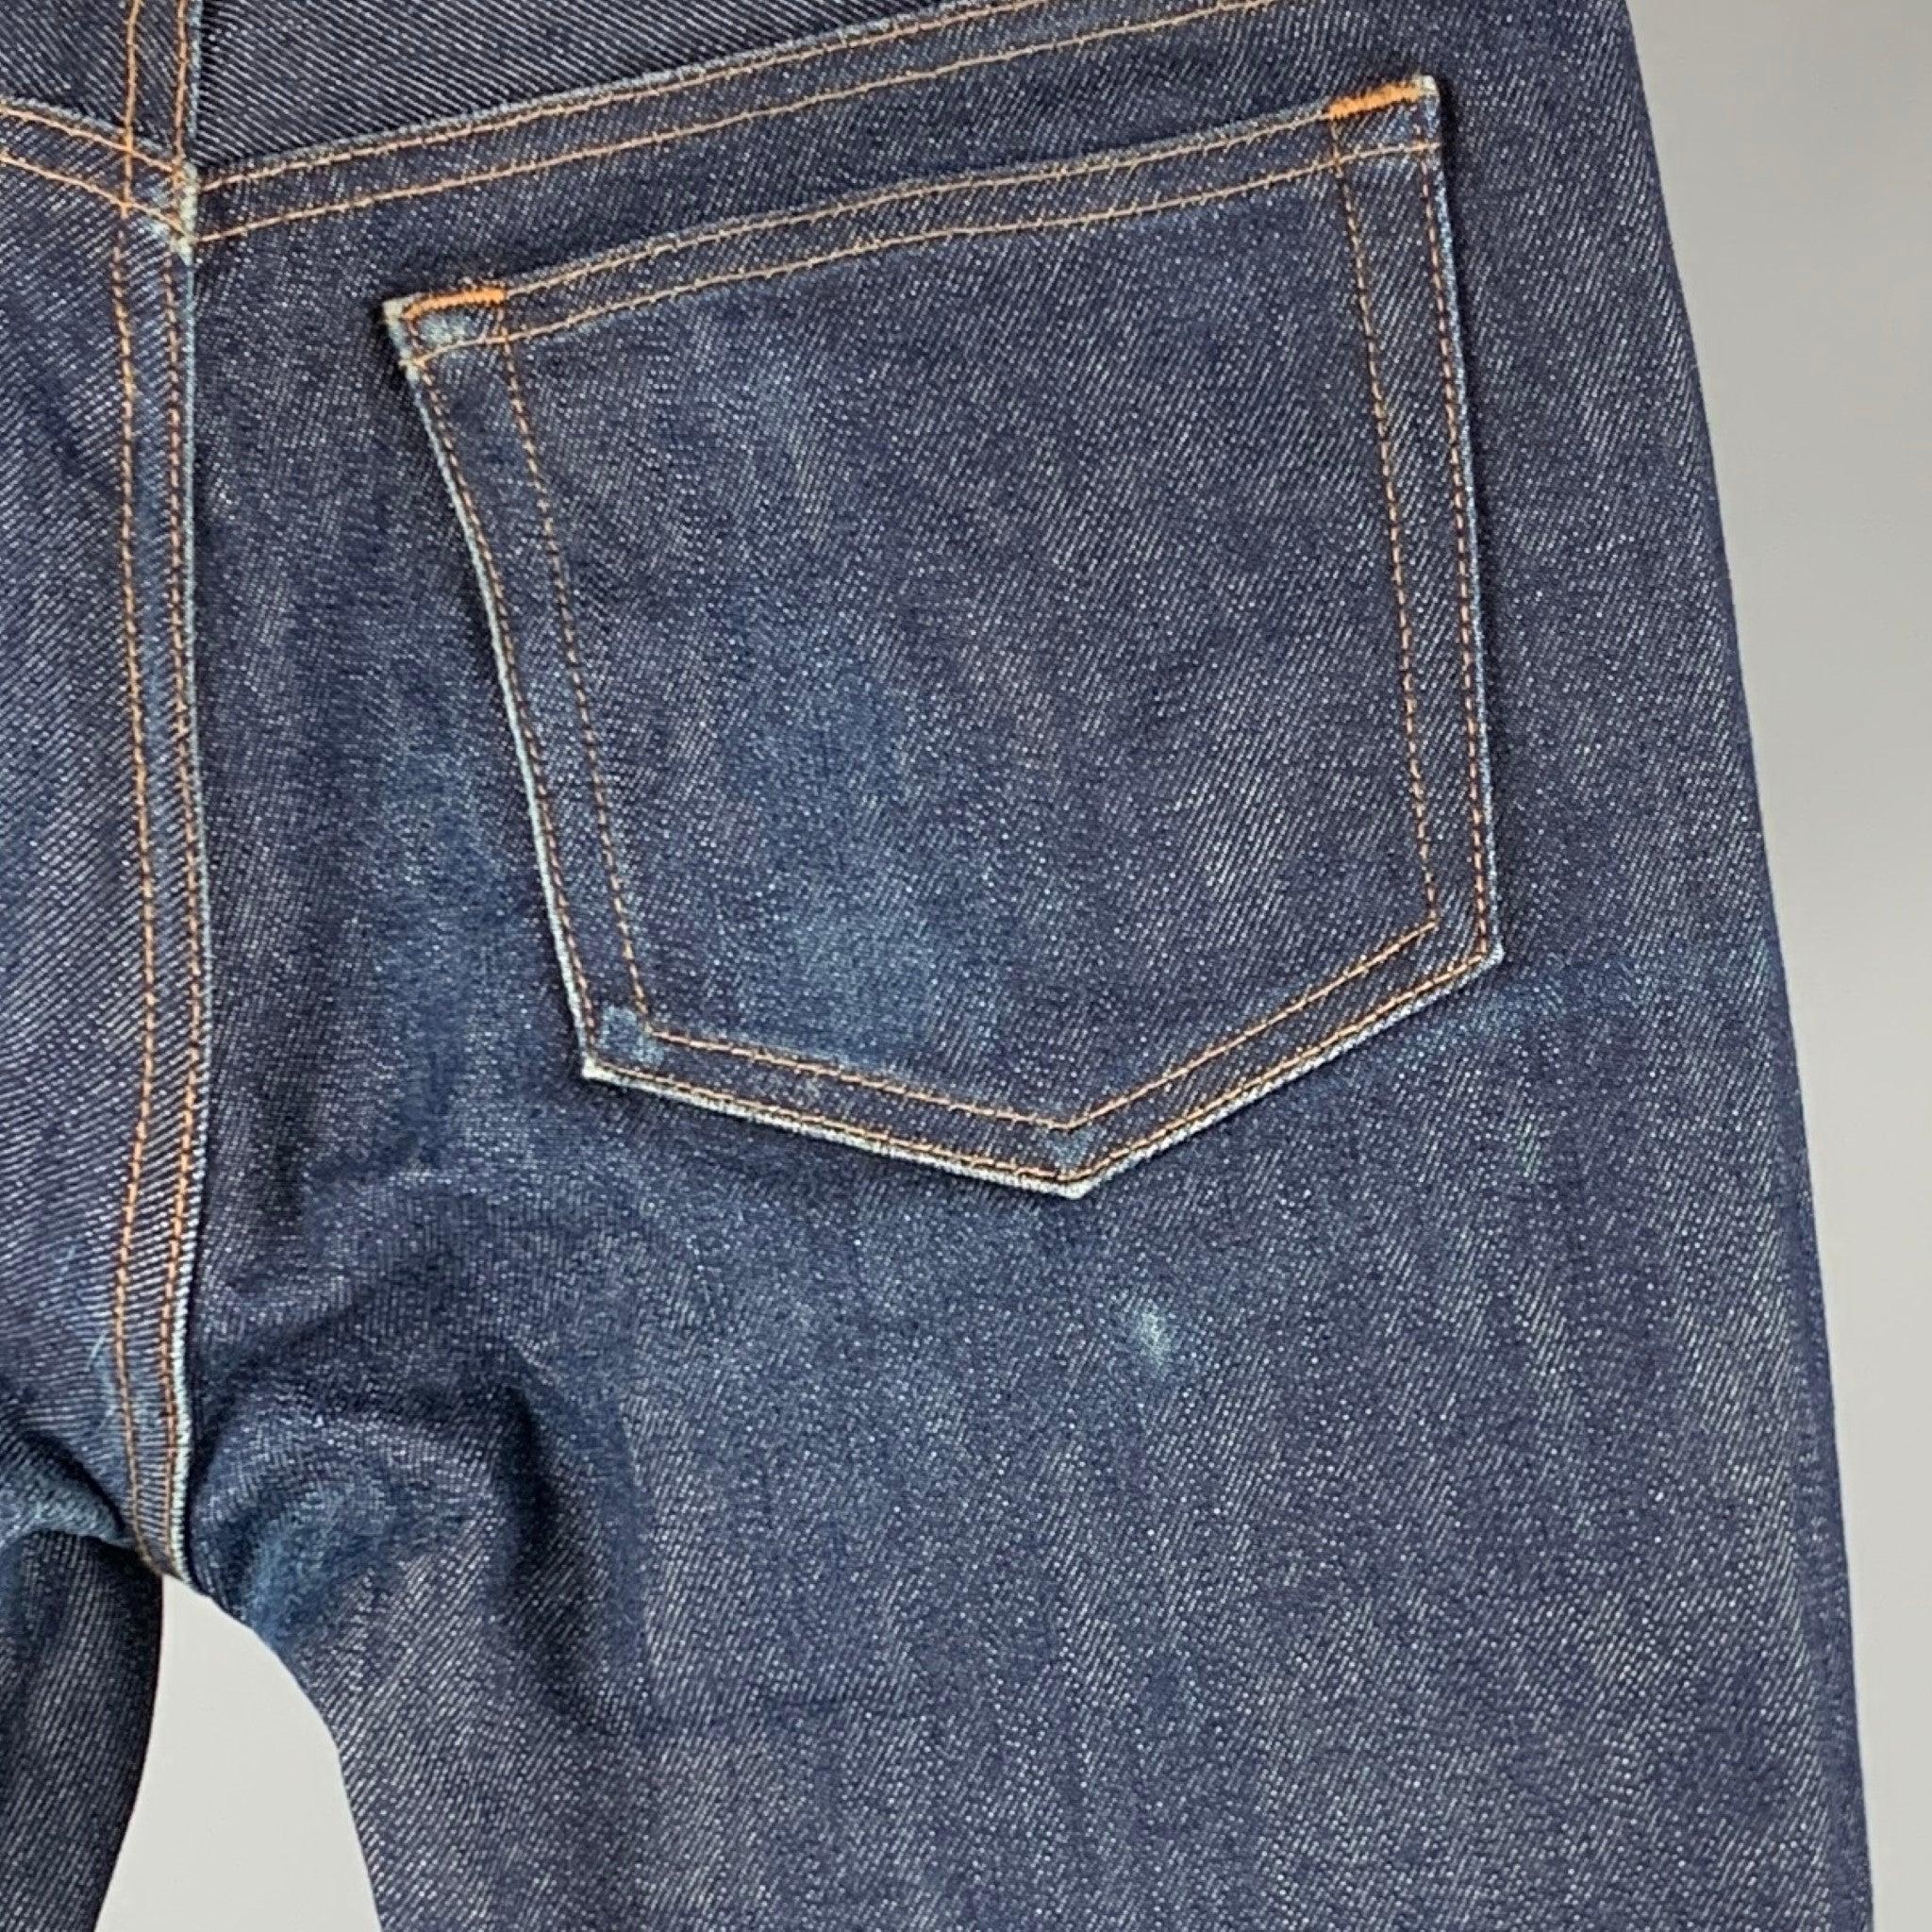 A.P.C. Size 29 Blue Cotton Polyurethane Button Fly Jeans In Good Condition For Sale In San Francisco, CA